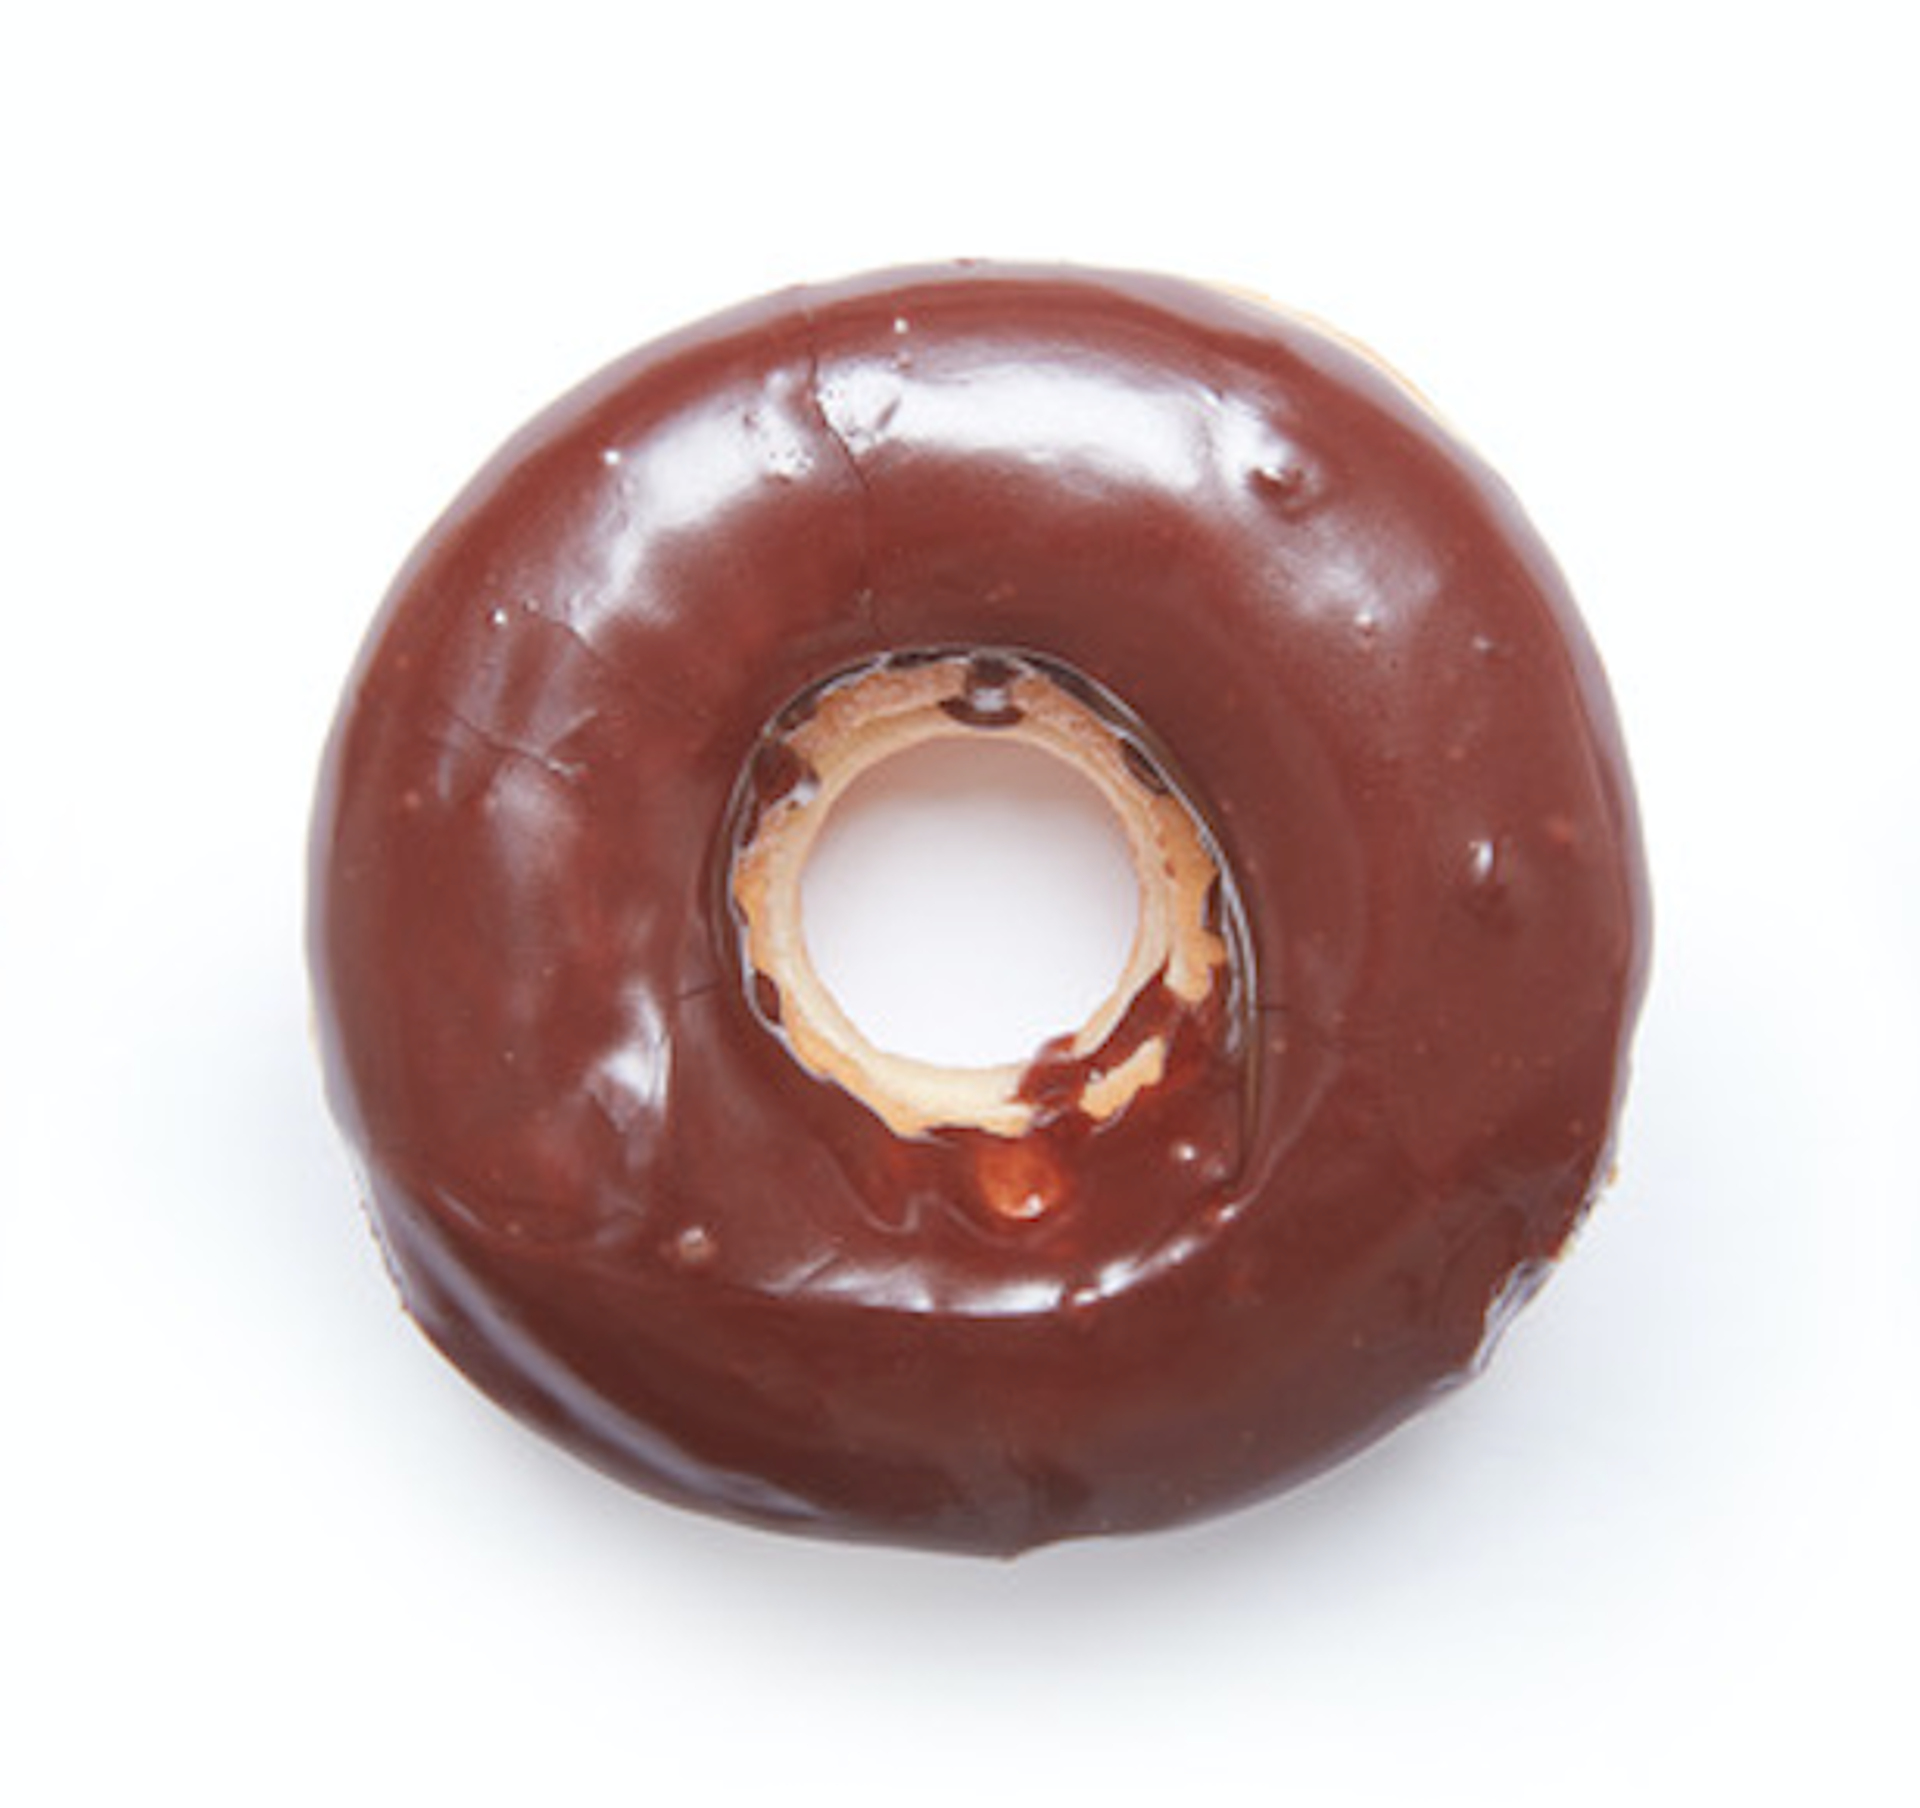 Donut - Chocolate by Peter Andrew Lusztyk / Refined Sugar